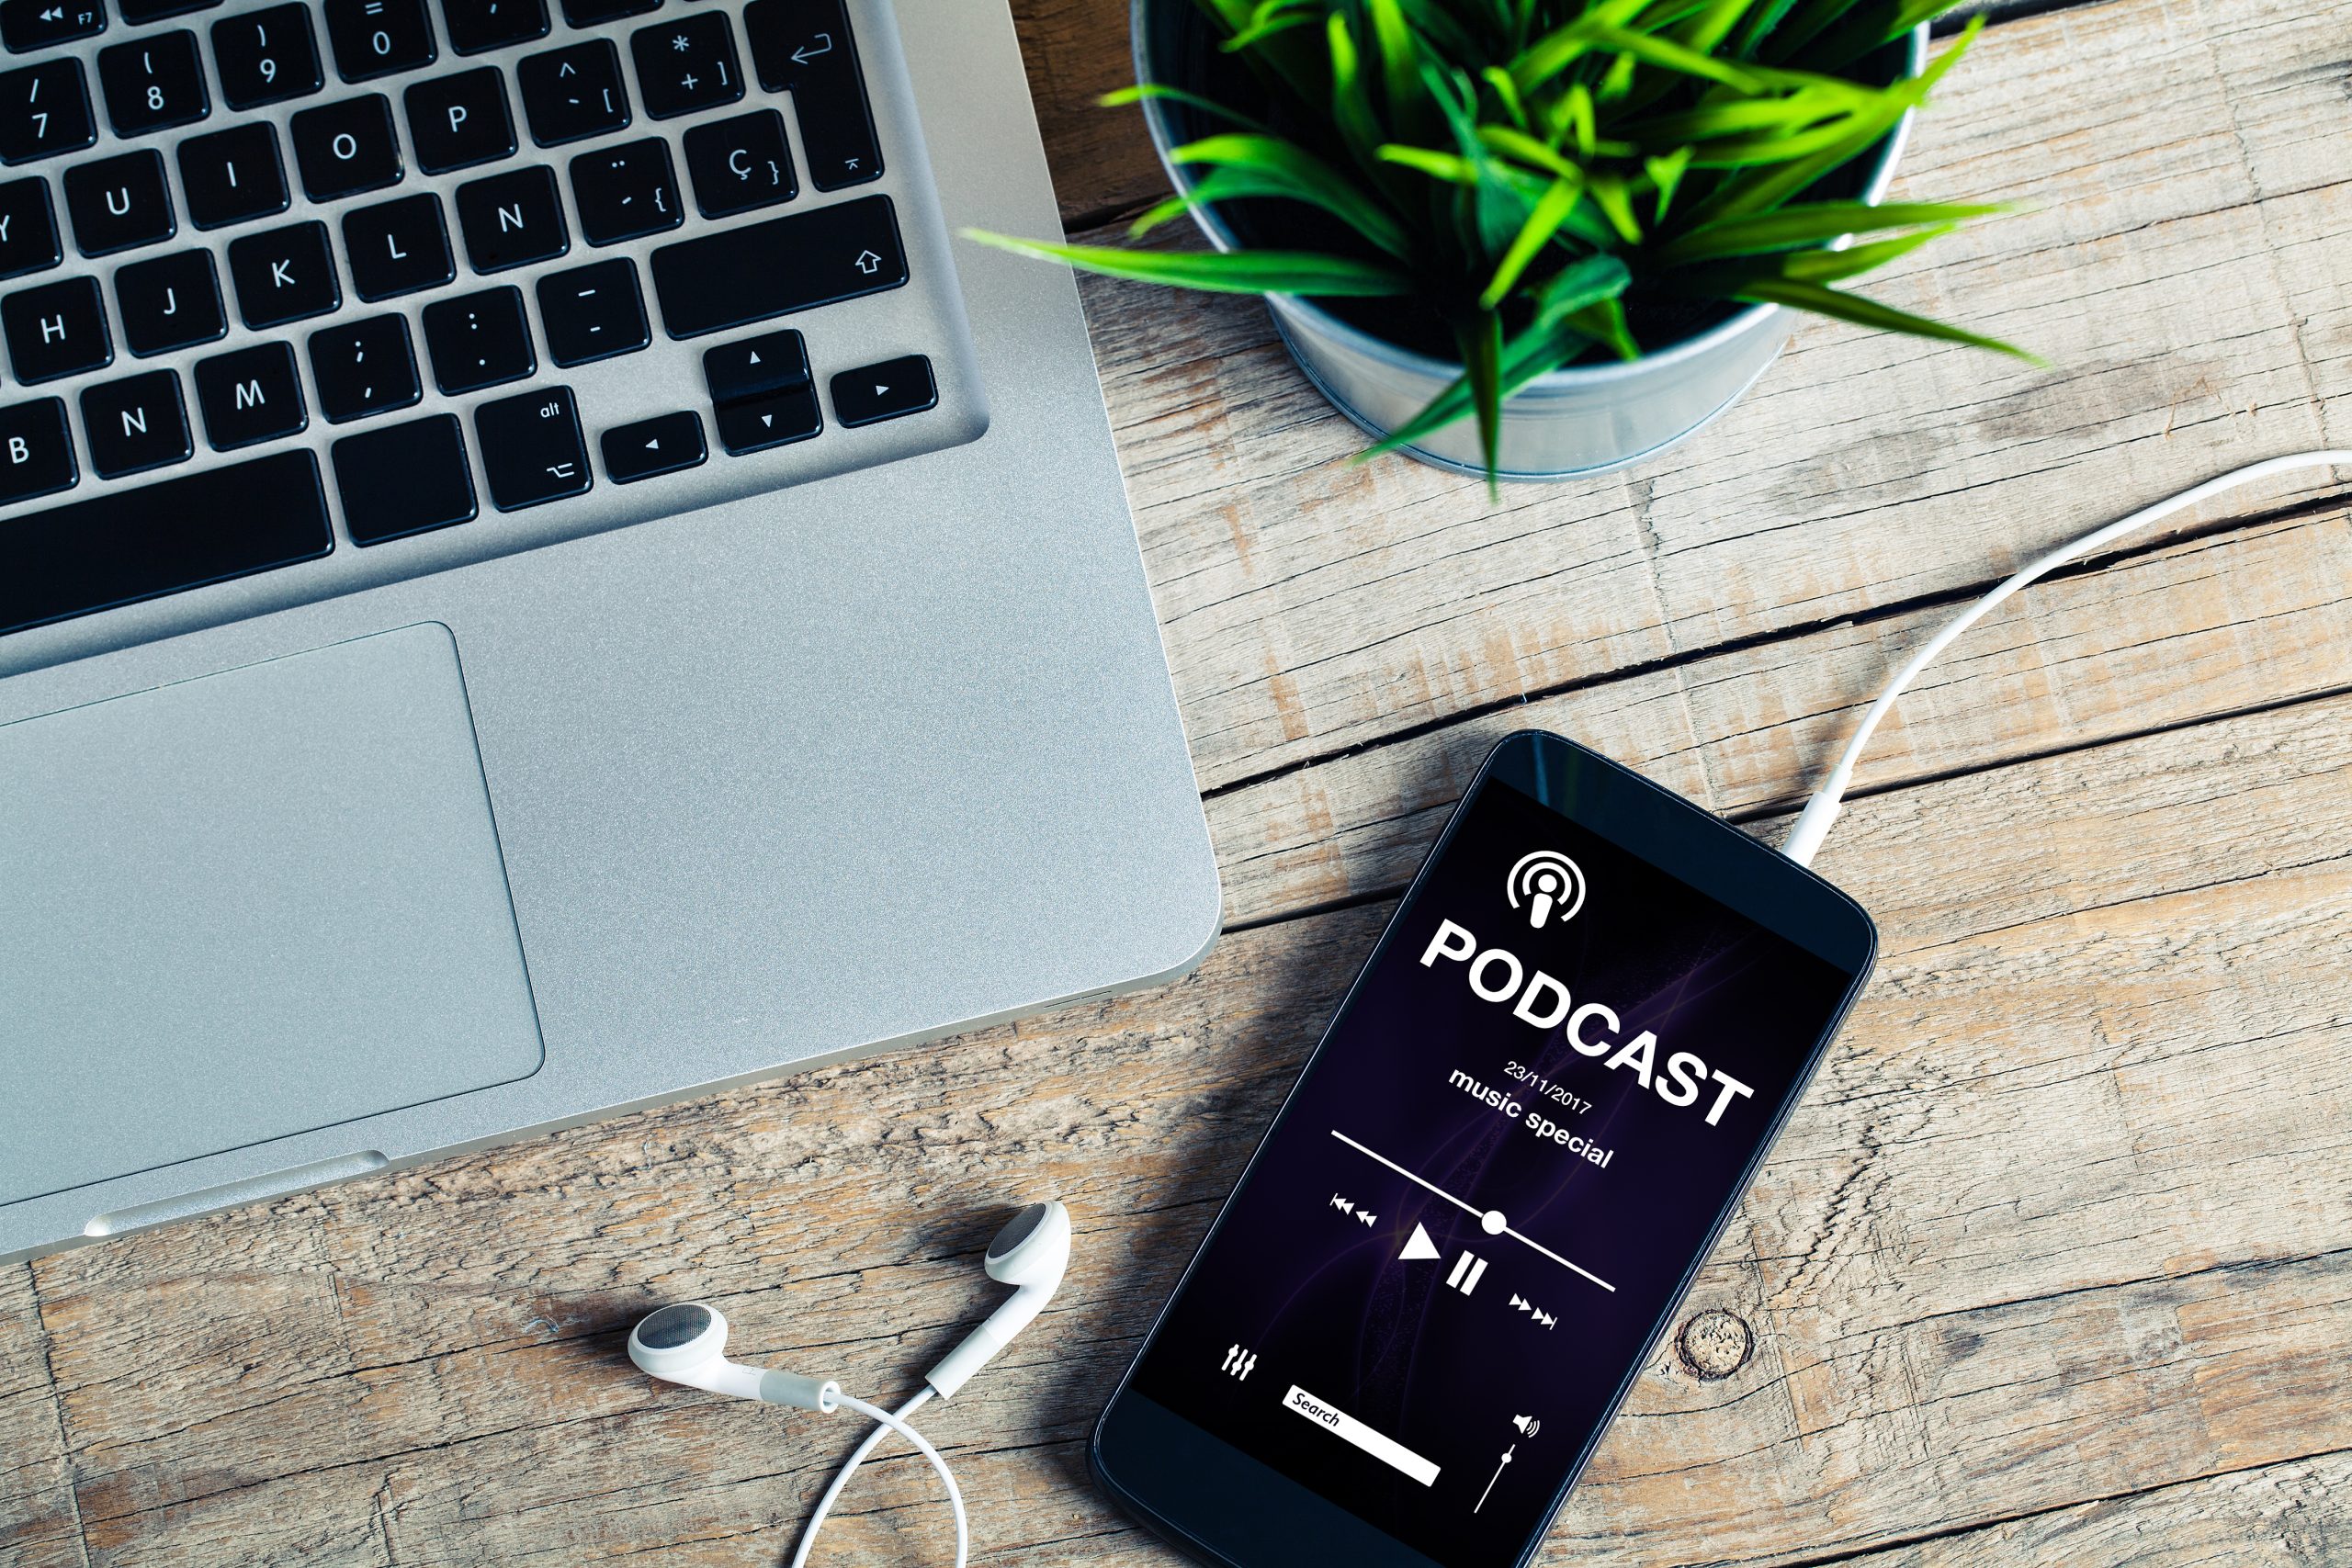 Podcasts on entertainment for seniors - Columbia Pacific